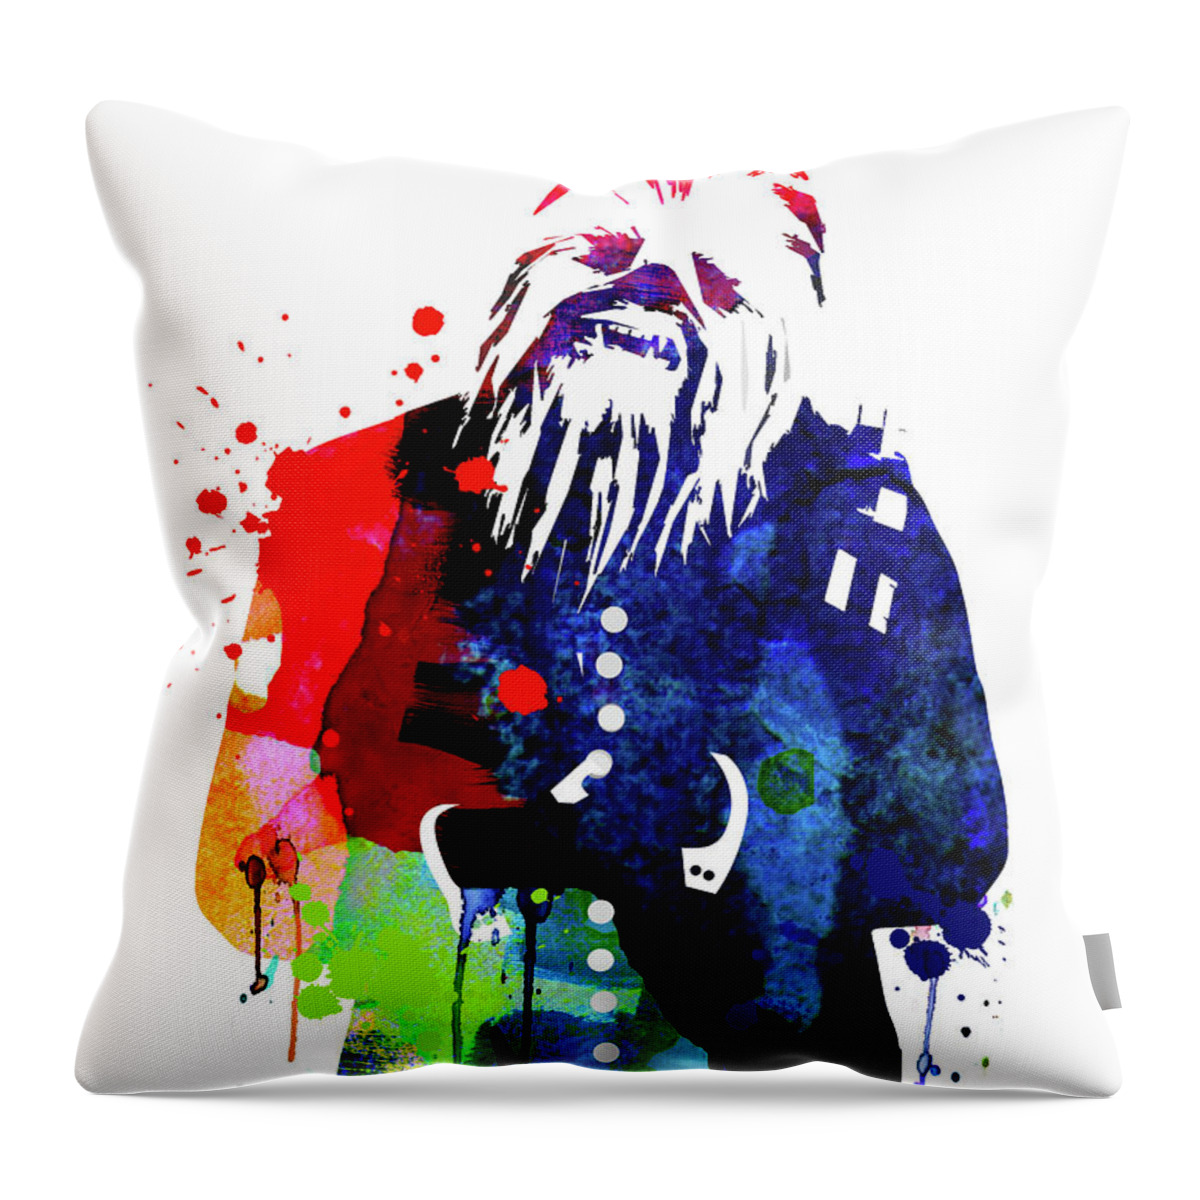  Throw Pillow featuring the mixed media Chewbacca in a Suite Watercolor by Naxart Studio